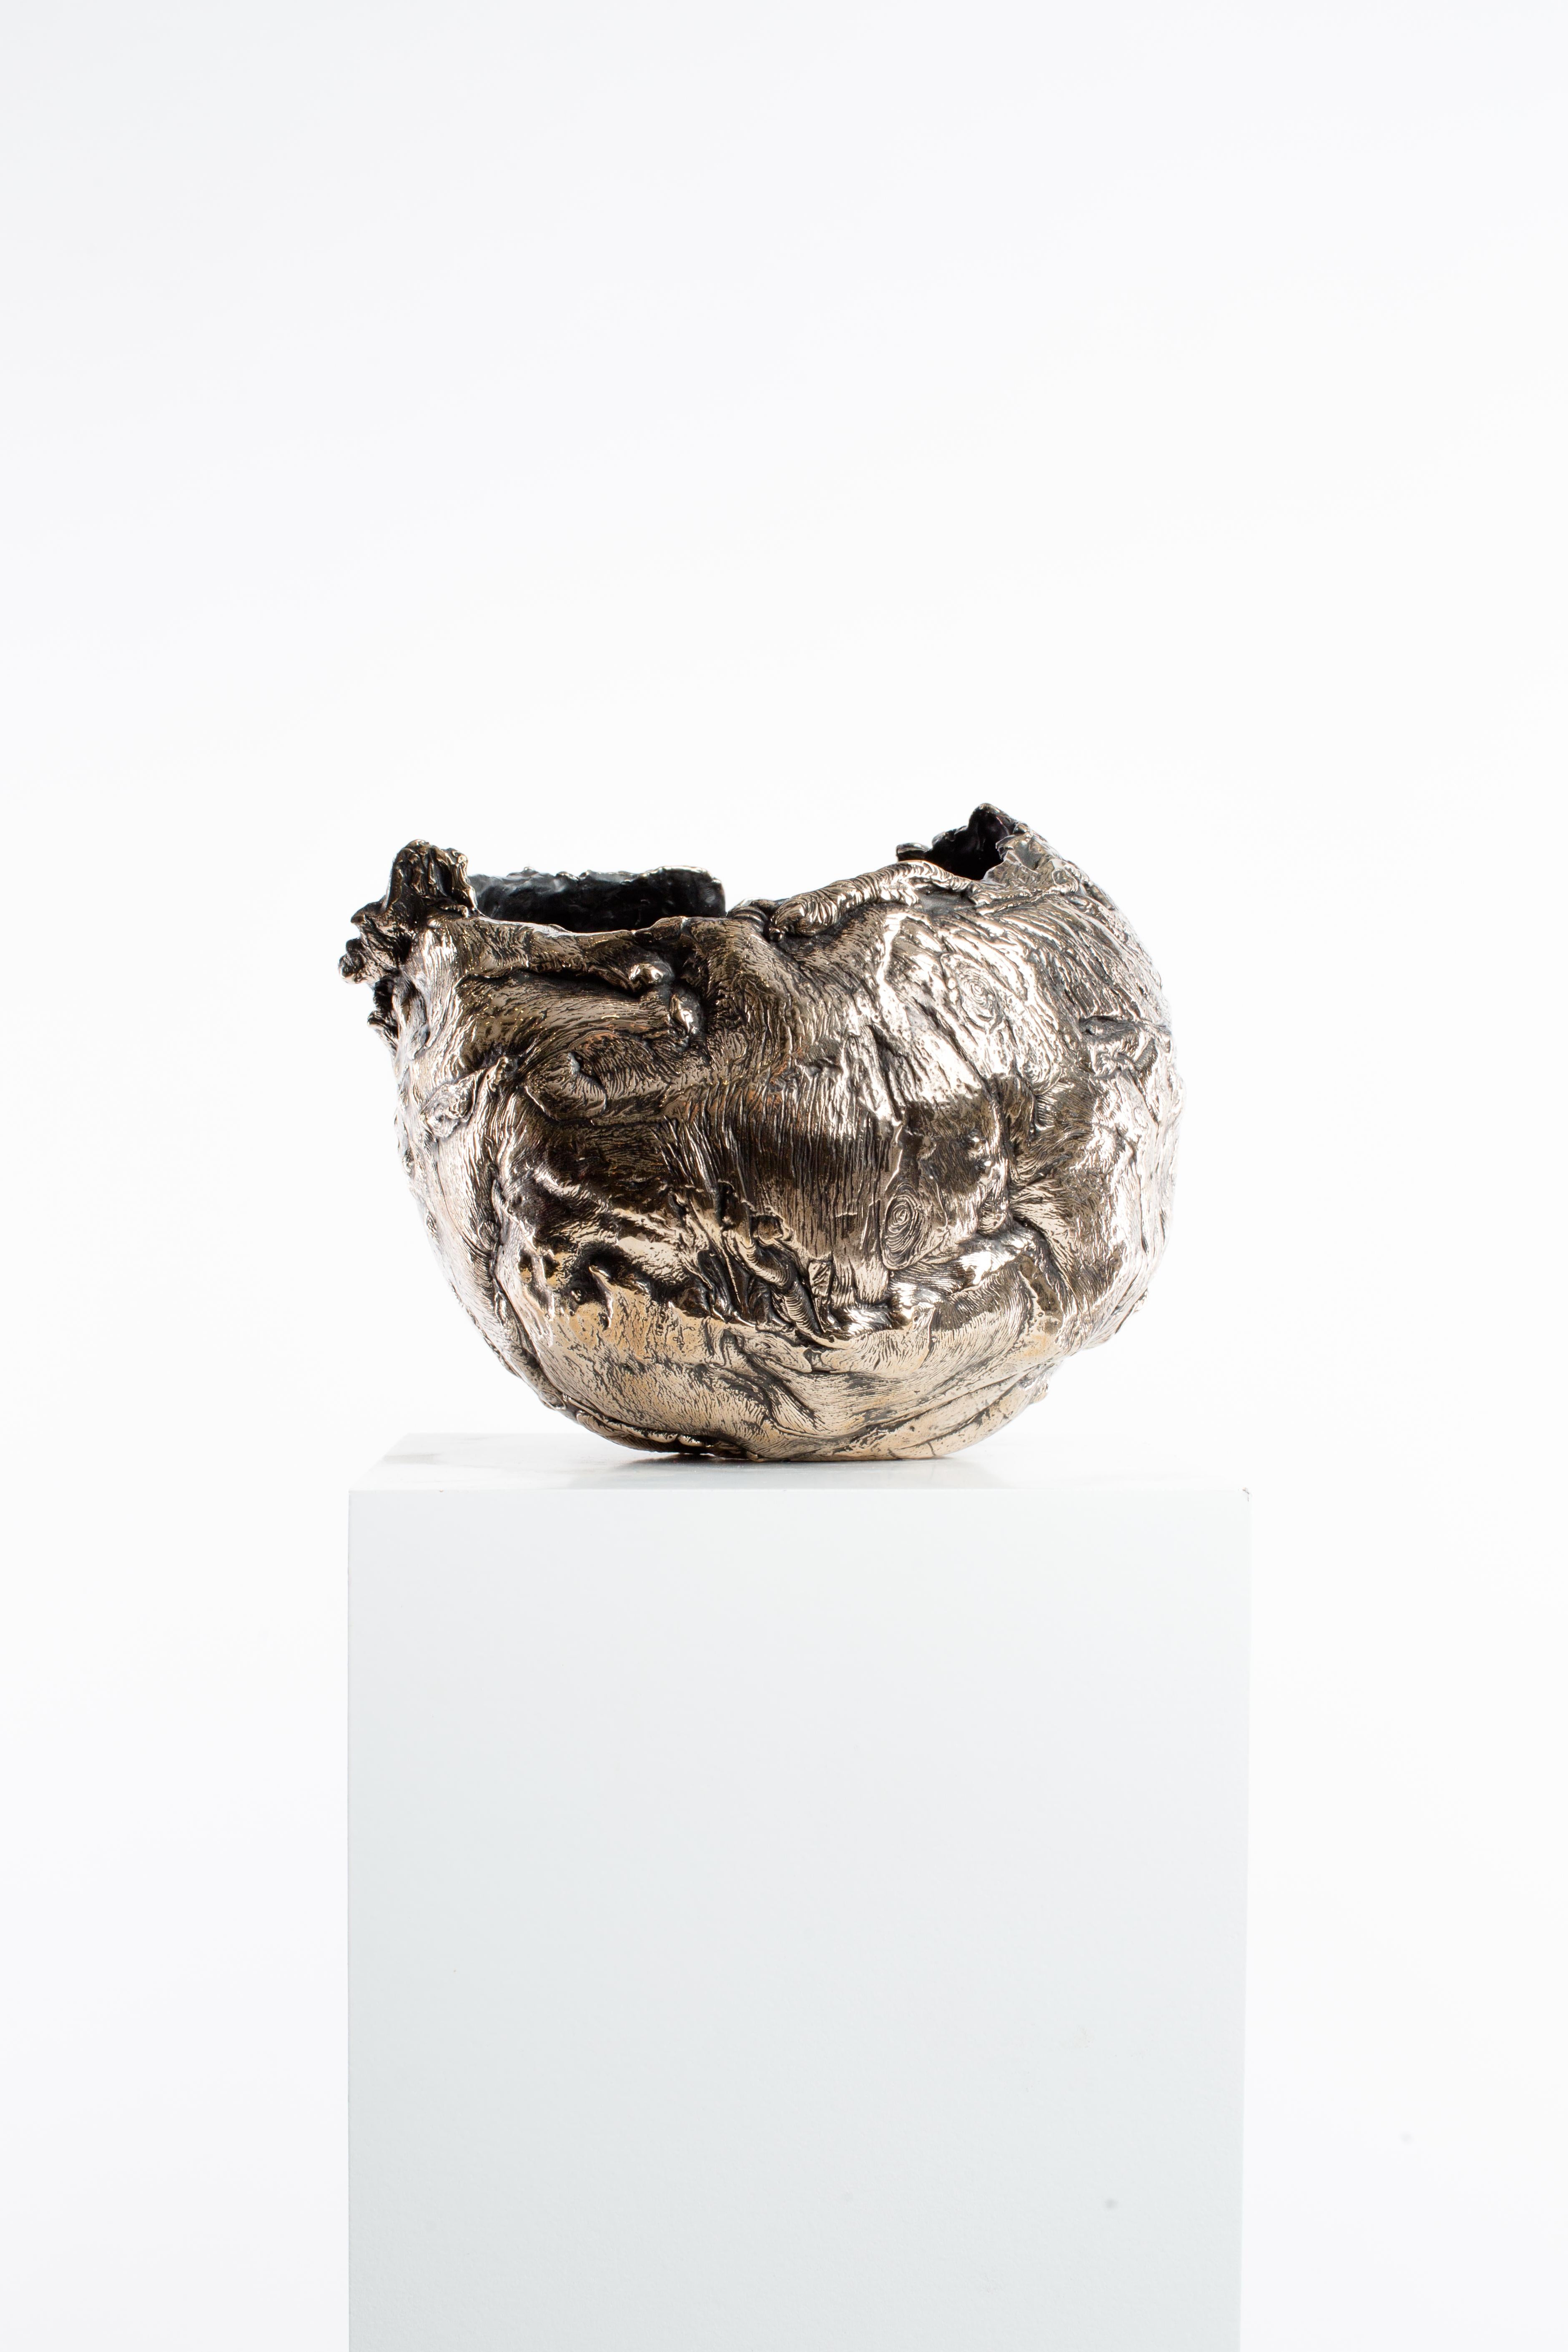 Polished, Bronze, Patina, Abstract, Contemporary, Modern, Sculpture, Vessel 3